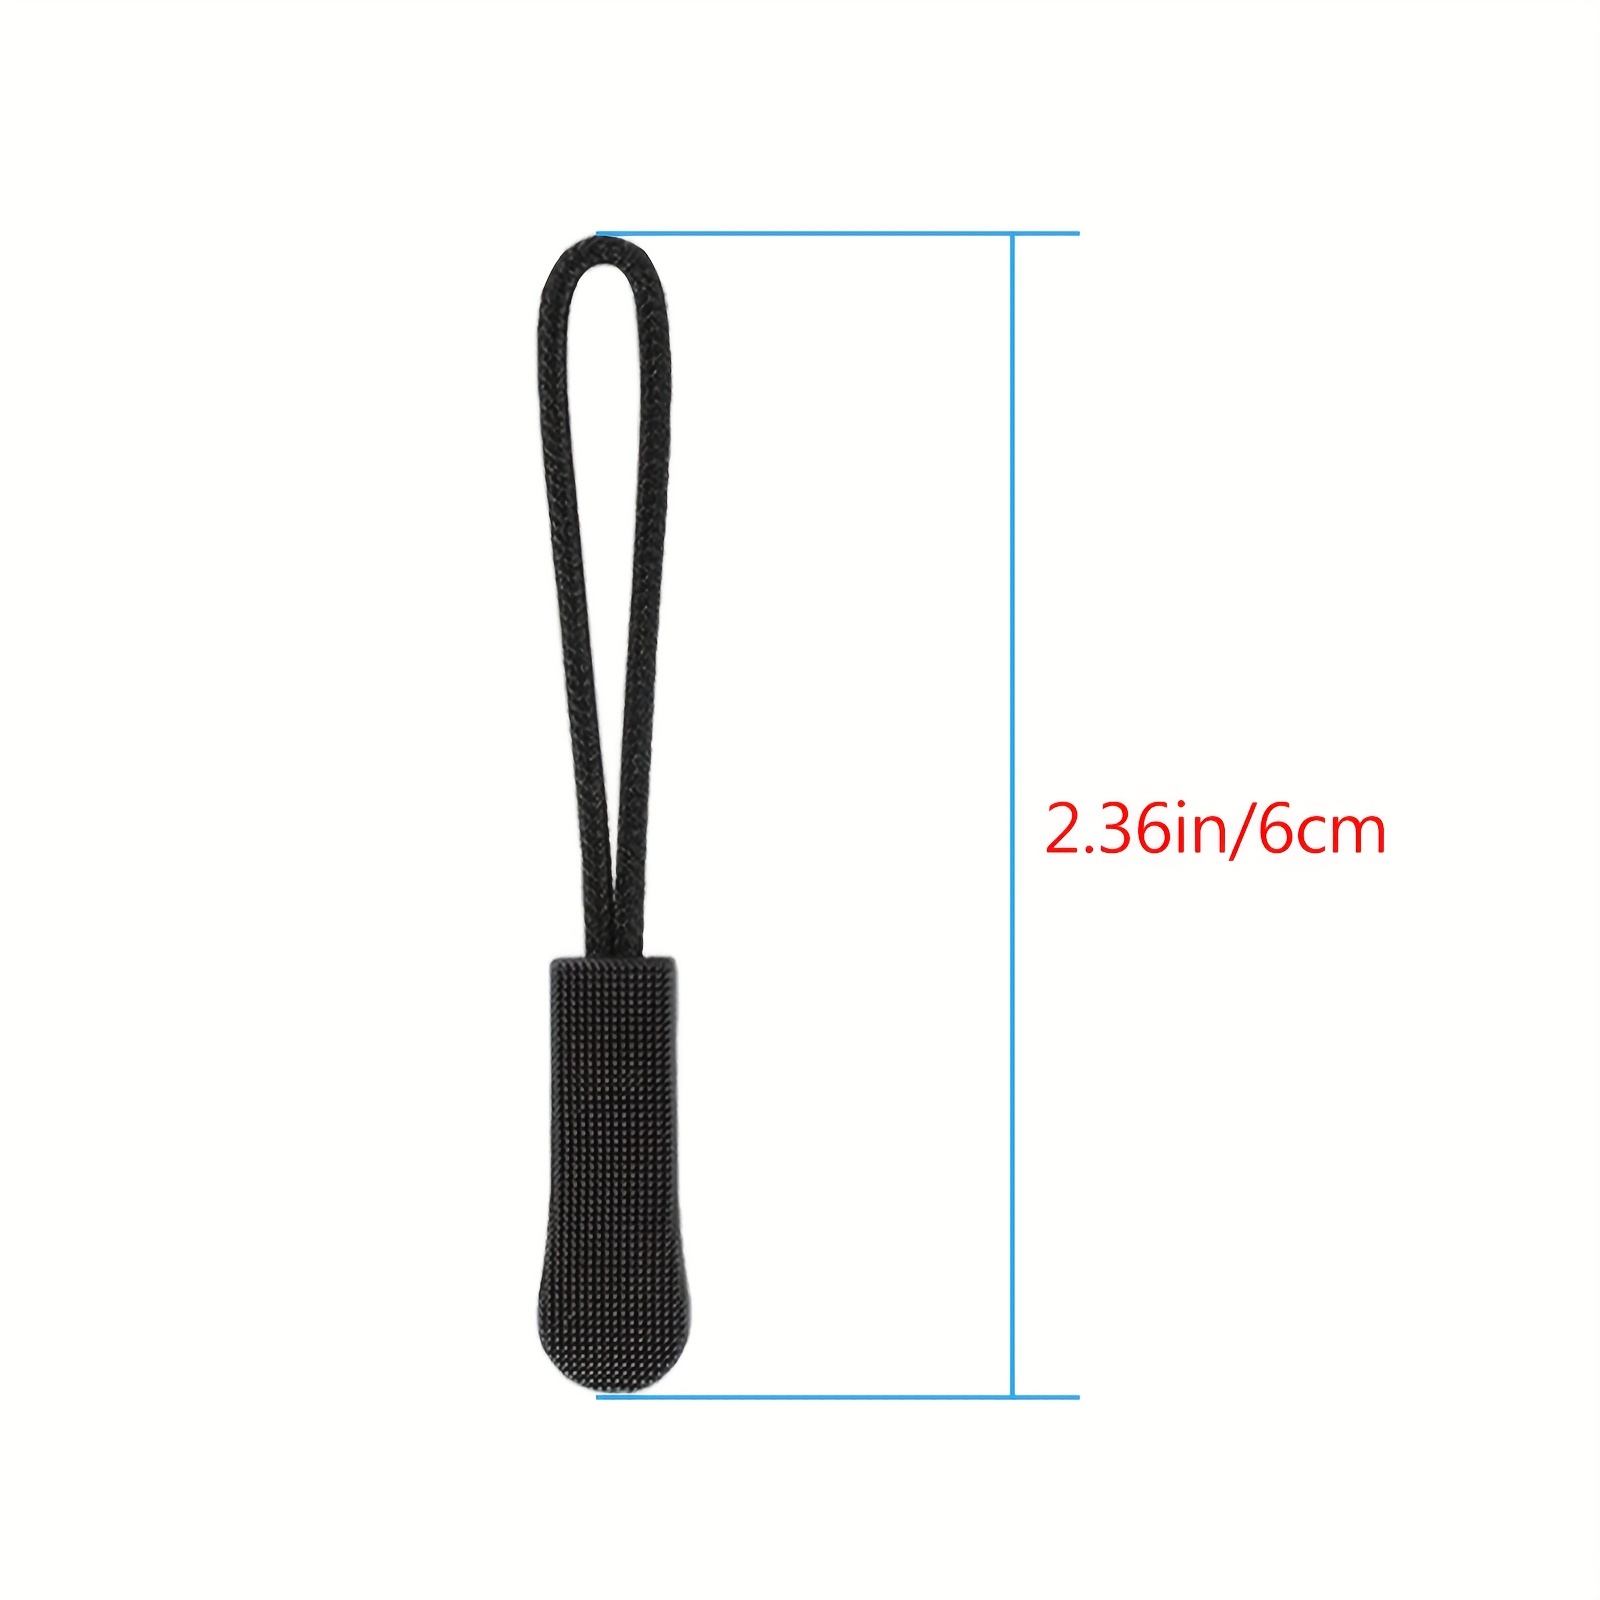  Zipper Pull Replacement, T Shape Heavy Duty Large Size Zipper  Pulls Tab Tags Cord Extension Fixer for Luggage, Backpacks, Jackets,  Purses, Handbags 4.1“x1.7x0.26” Black 10pcs